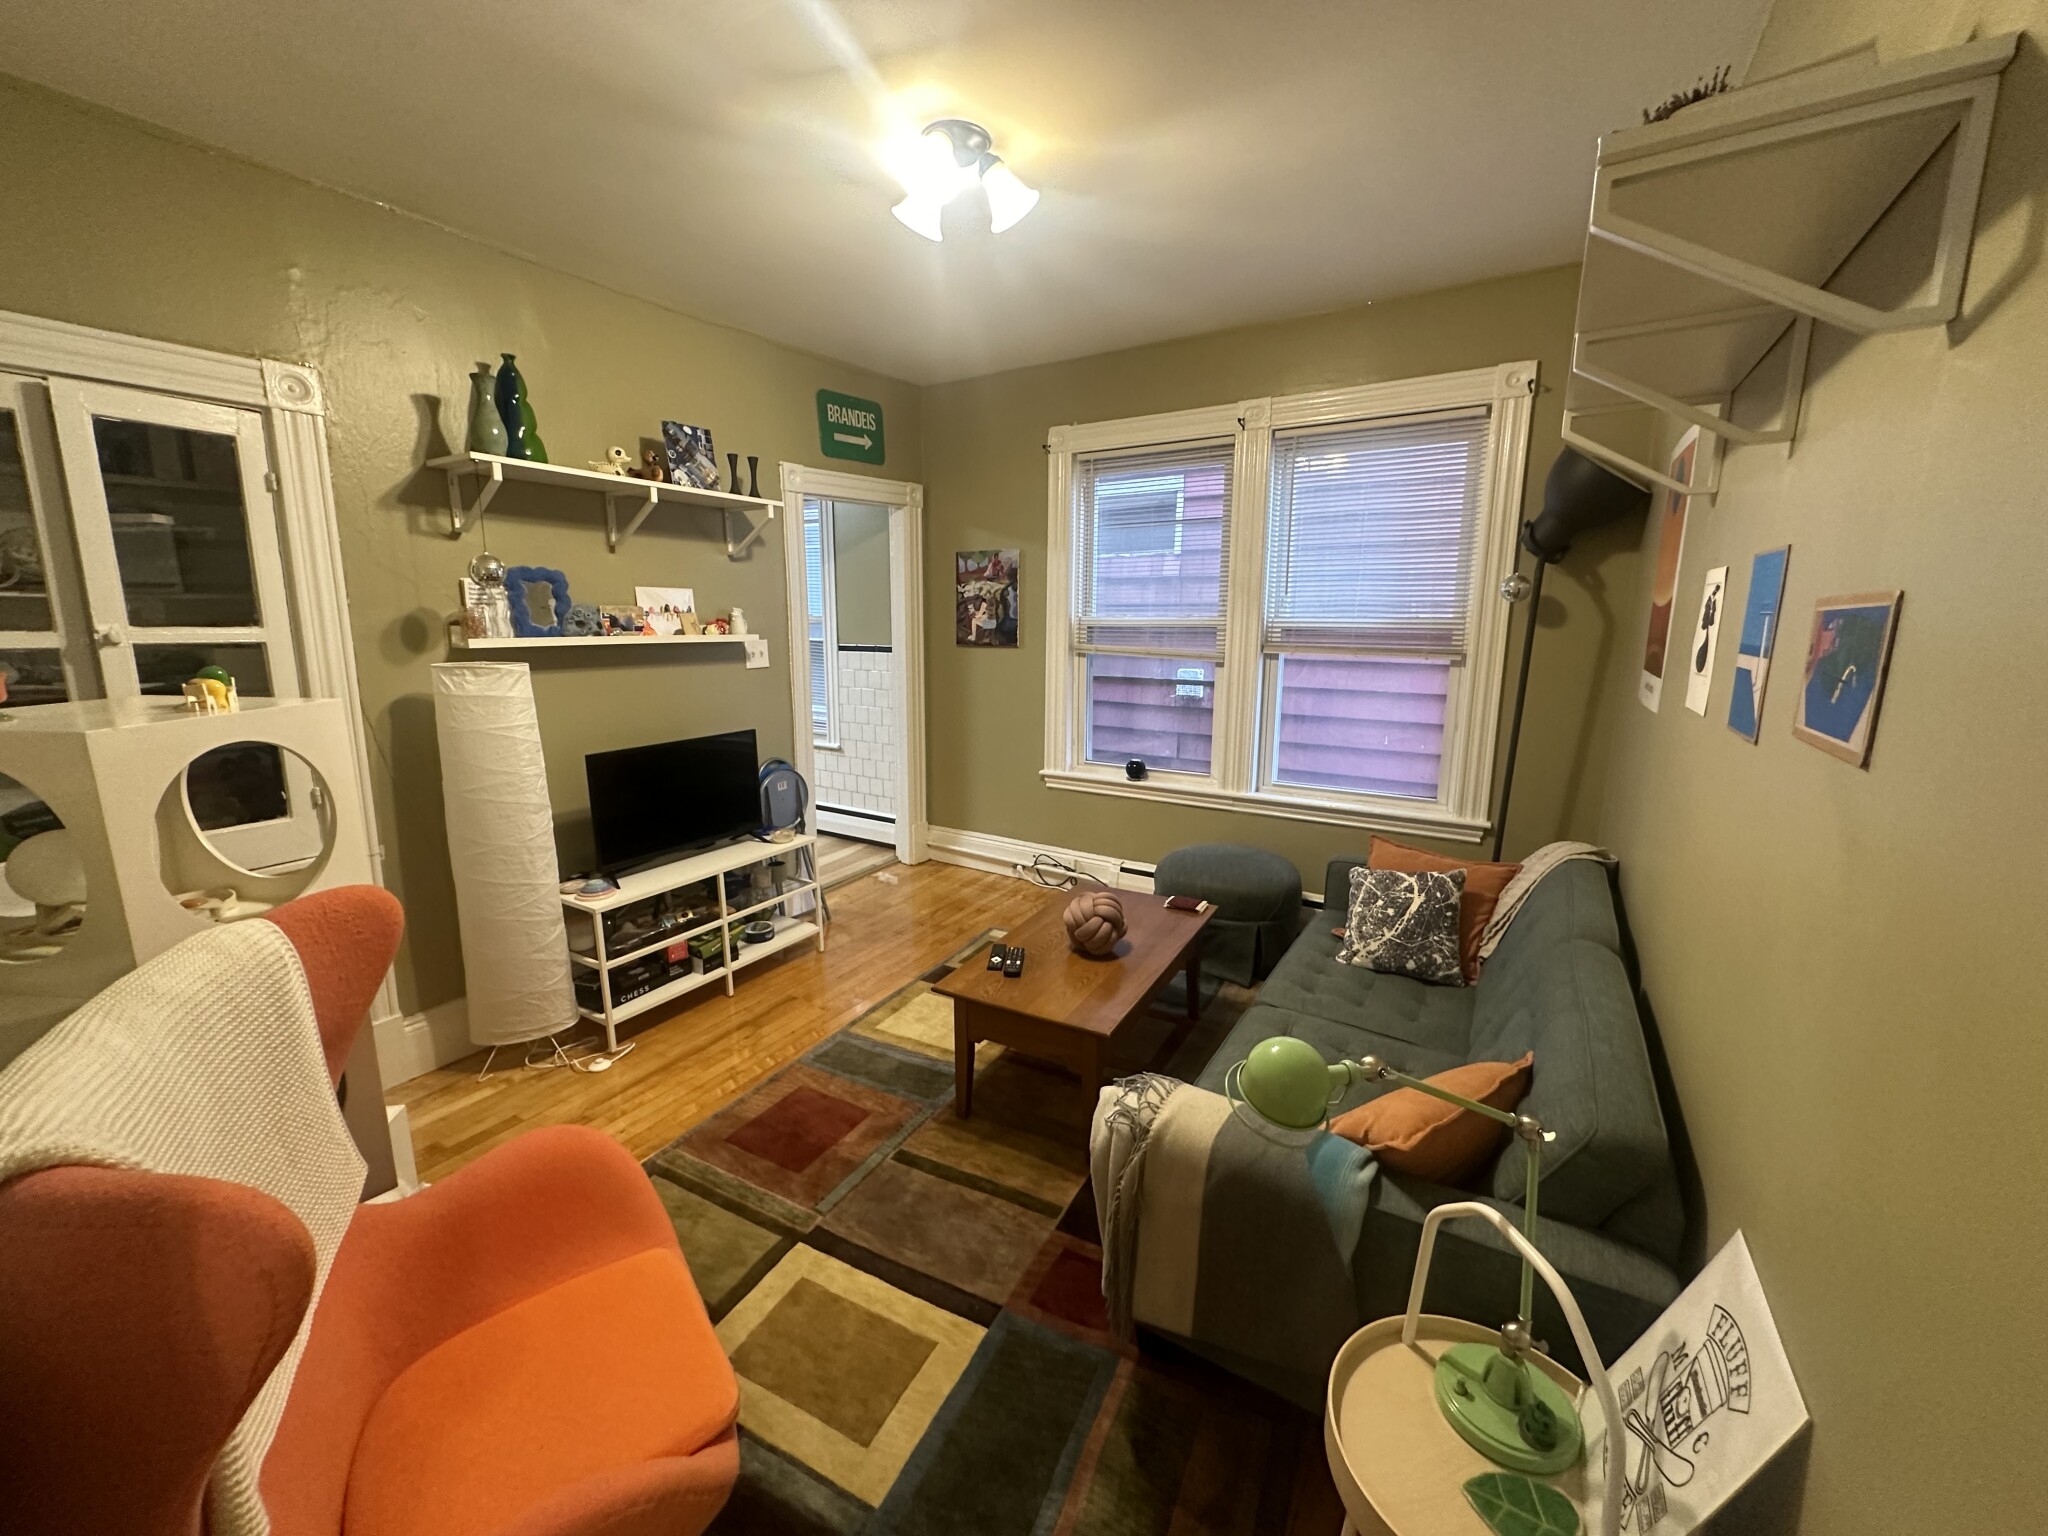 Photos of apartment on Central St.,Somerville MA 02143